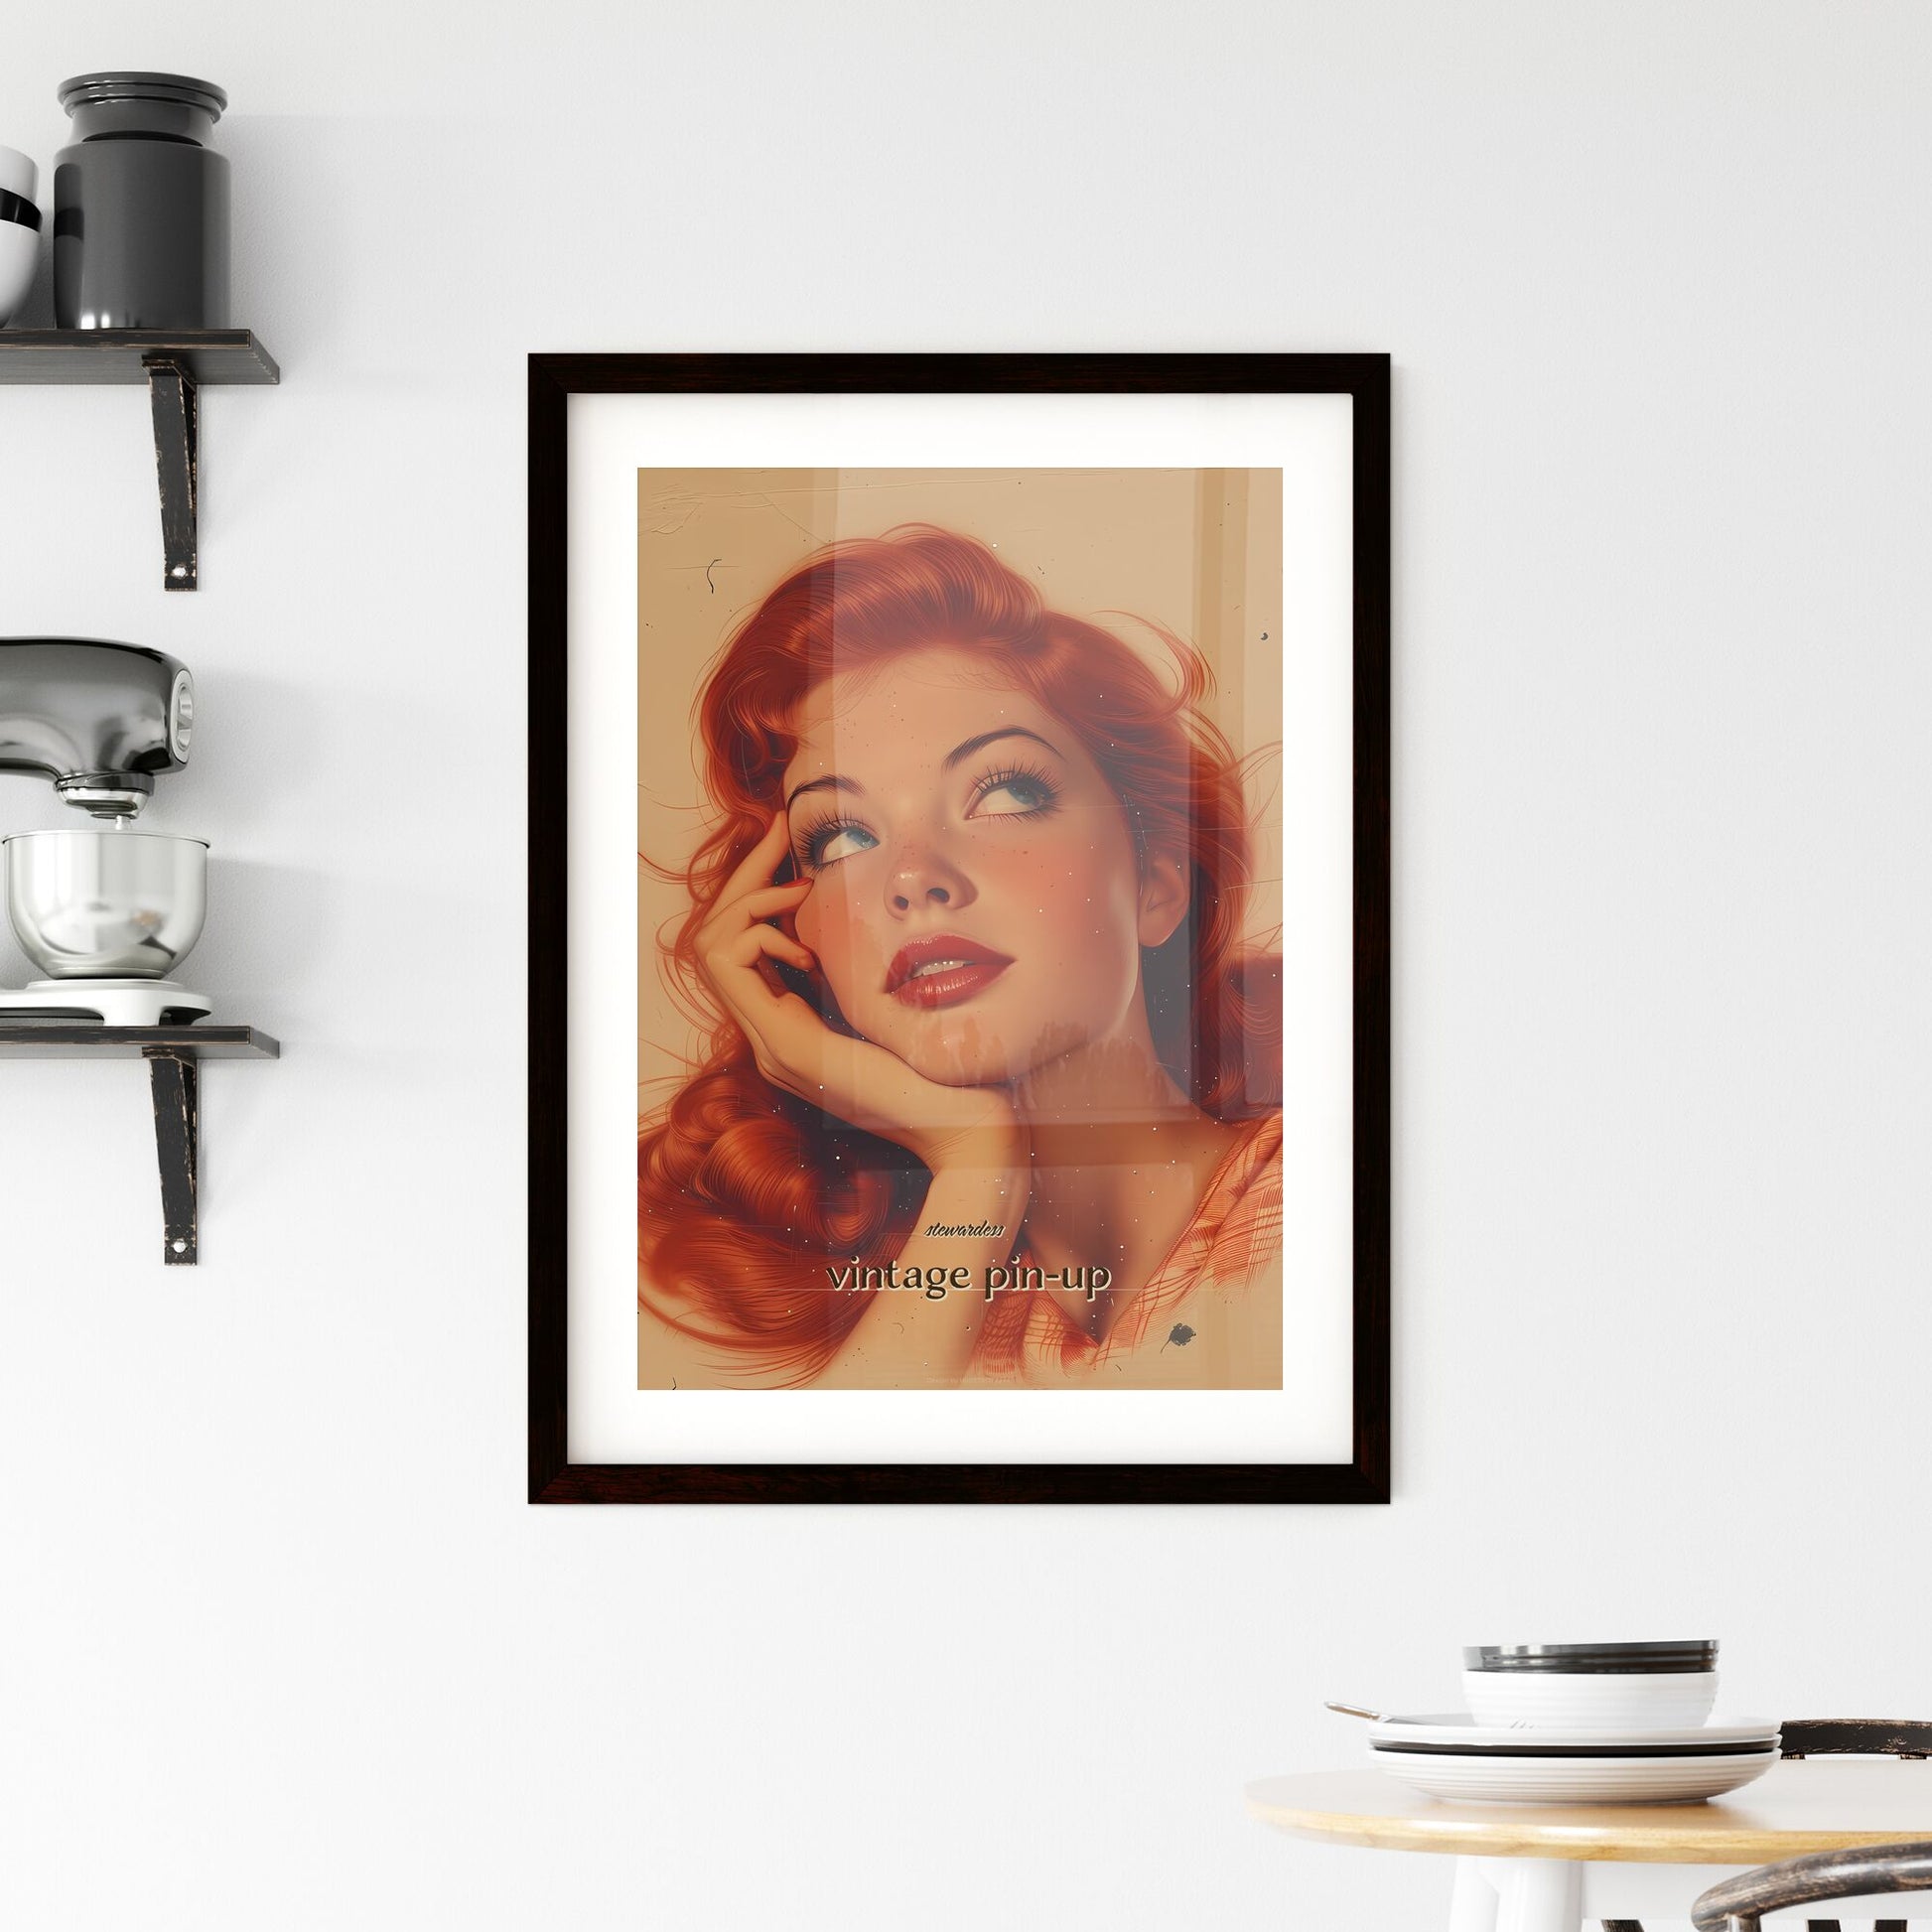 stewardess, vintage pin-up, A Poster of a woman with red hair and red lipstick Default Title